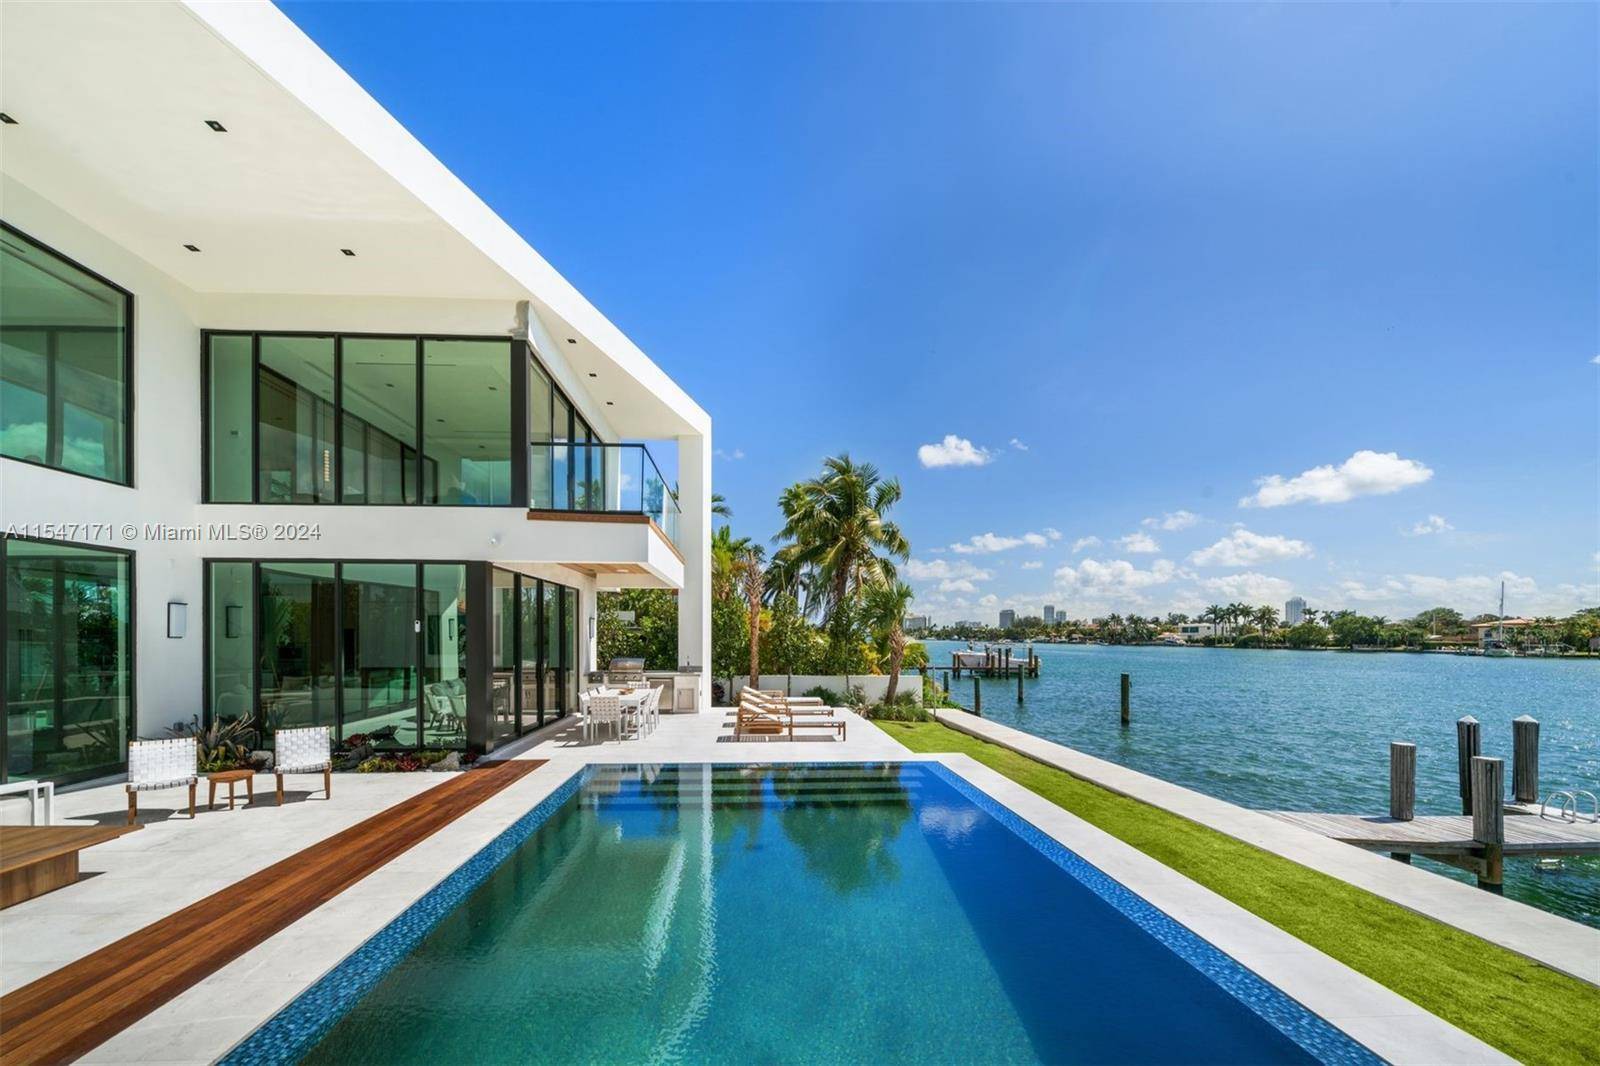 Indulge in opulent waterfront living in this brand new construction home with a premier lot position on the wide bay in gated Biscayne Point.